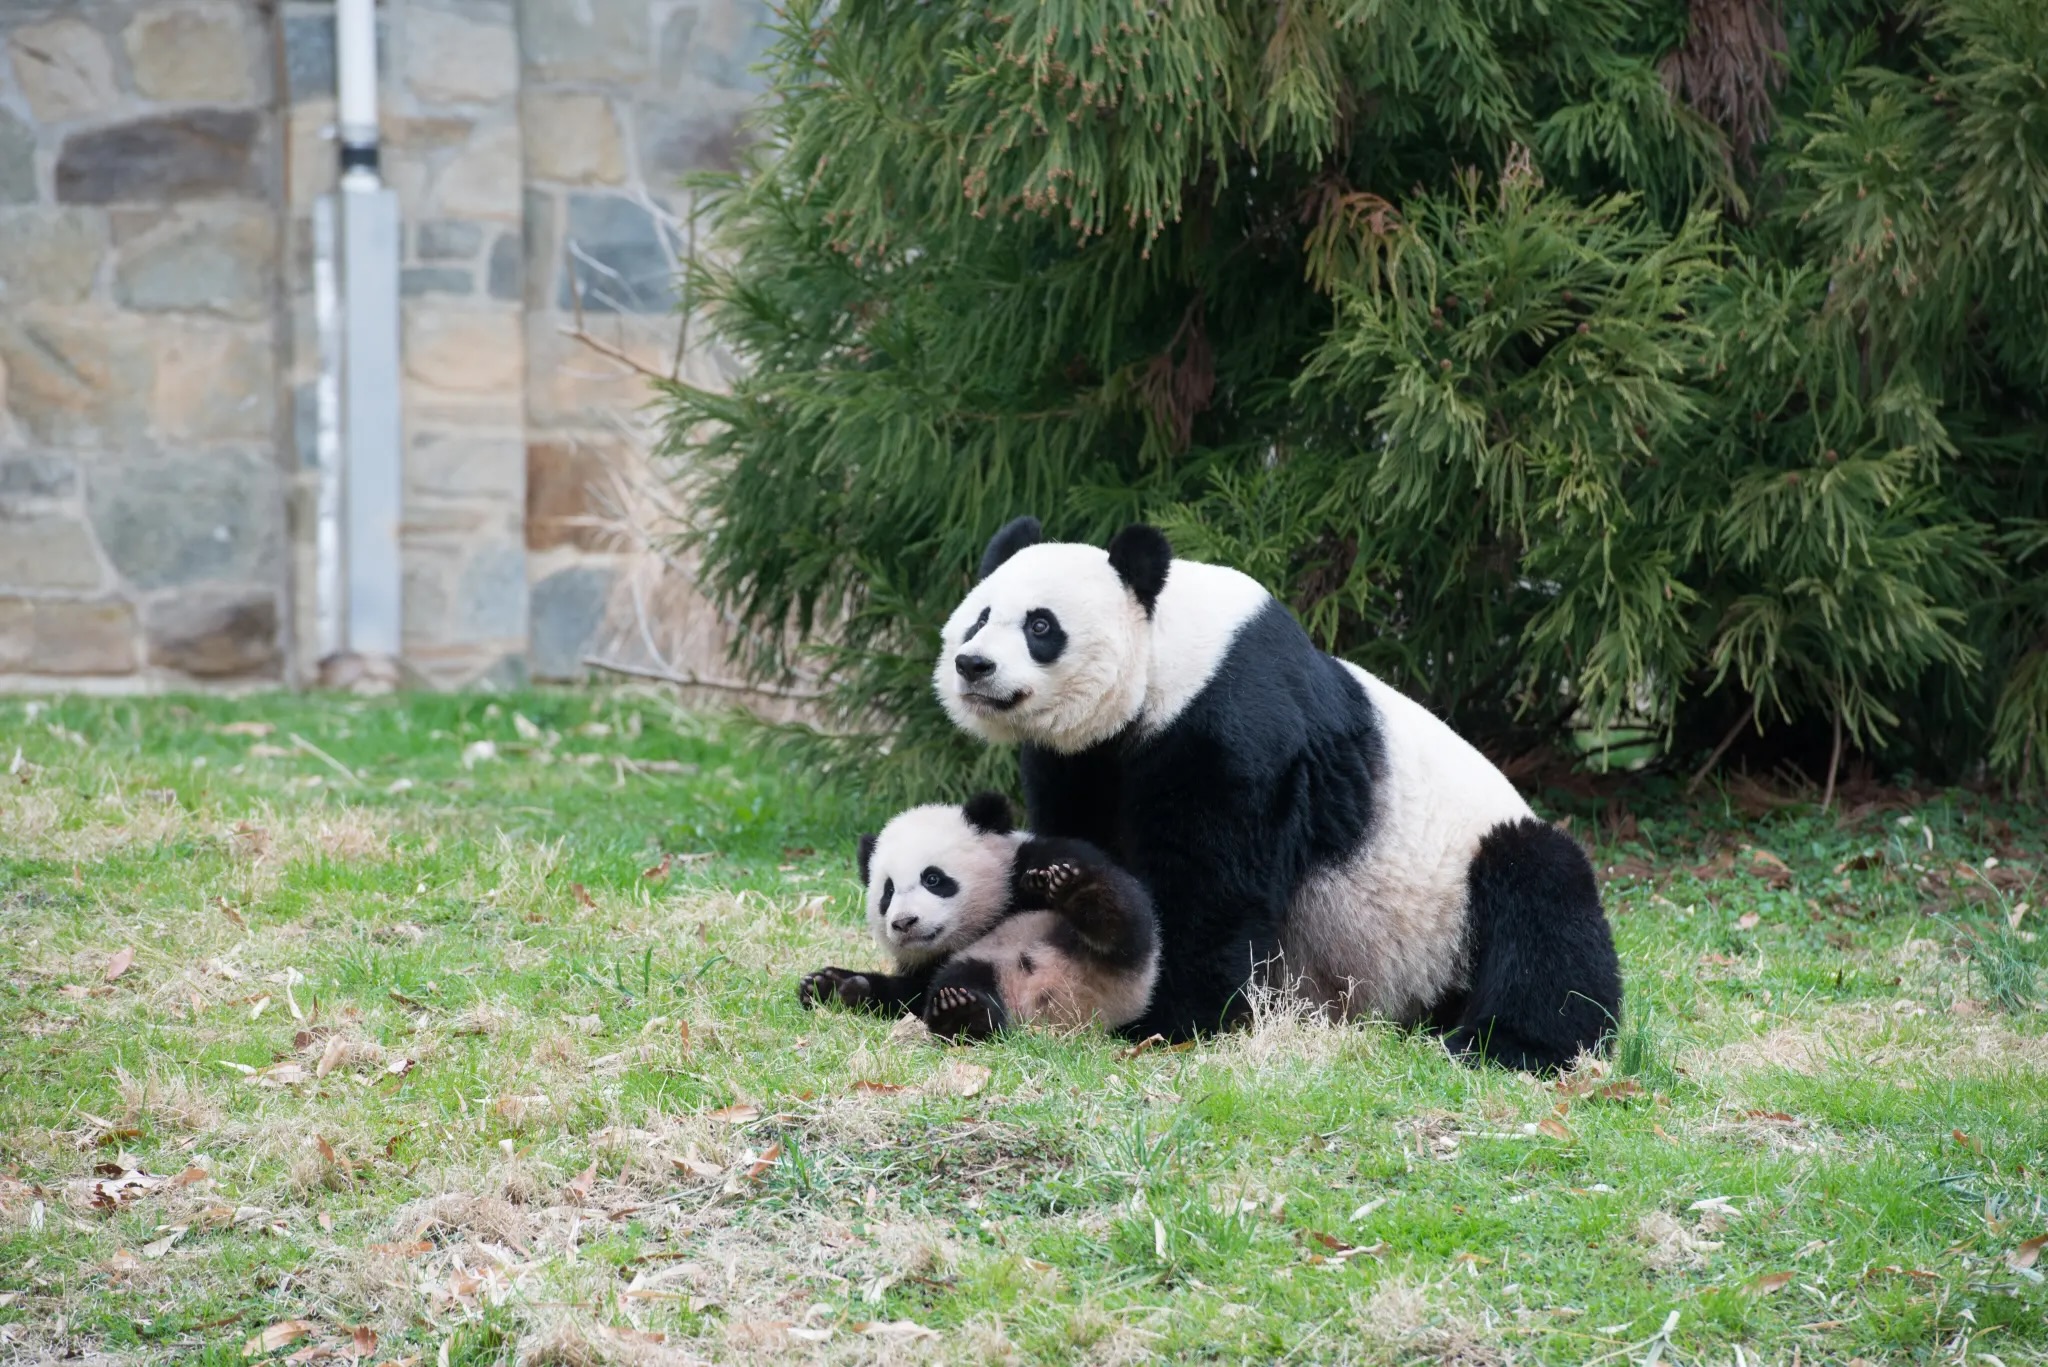 Mother panda plays with a cub